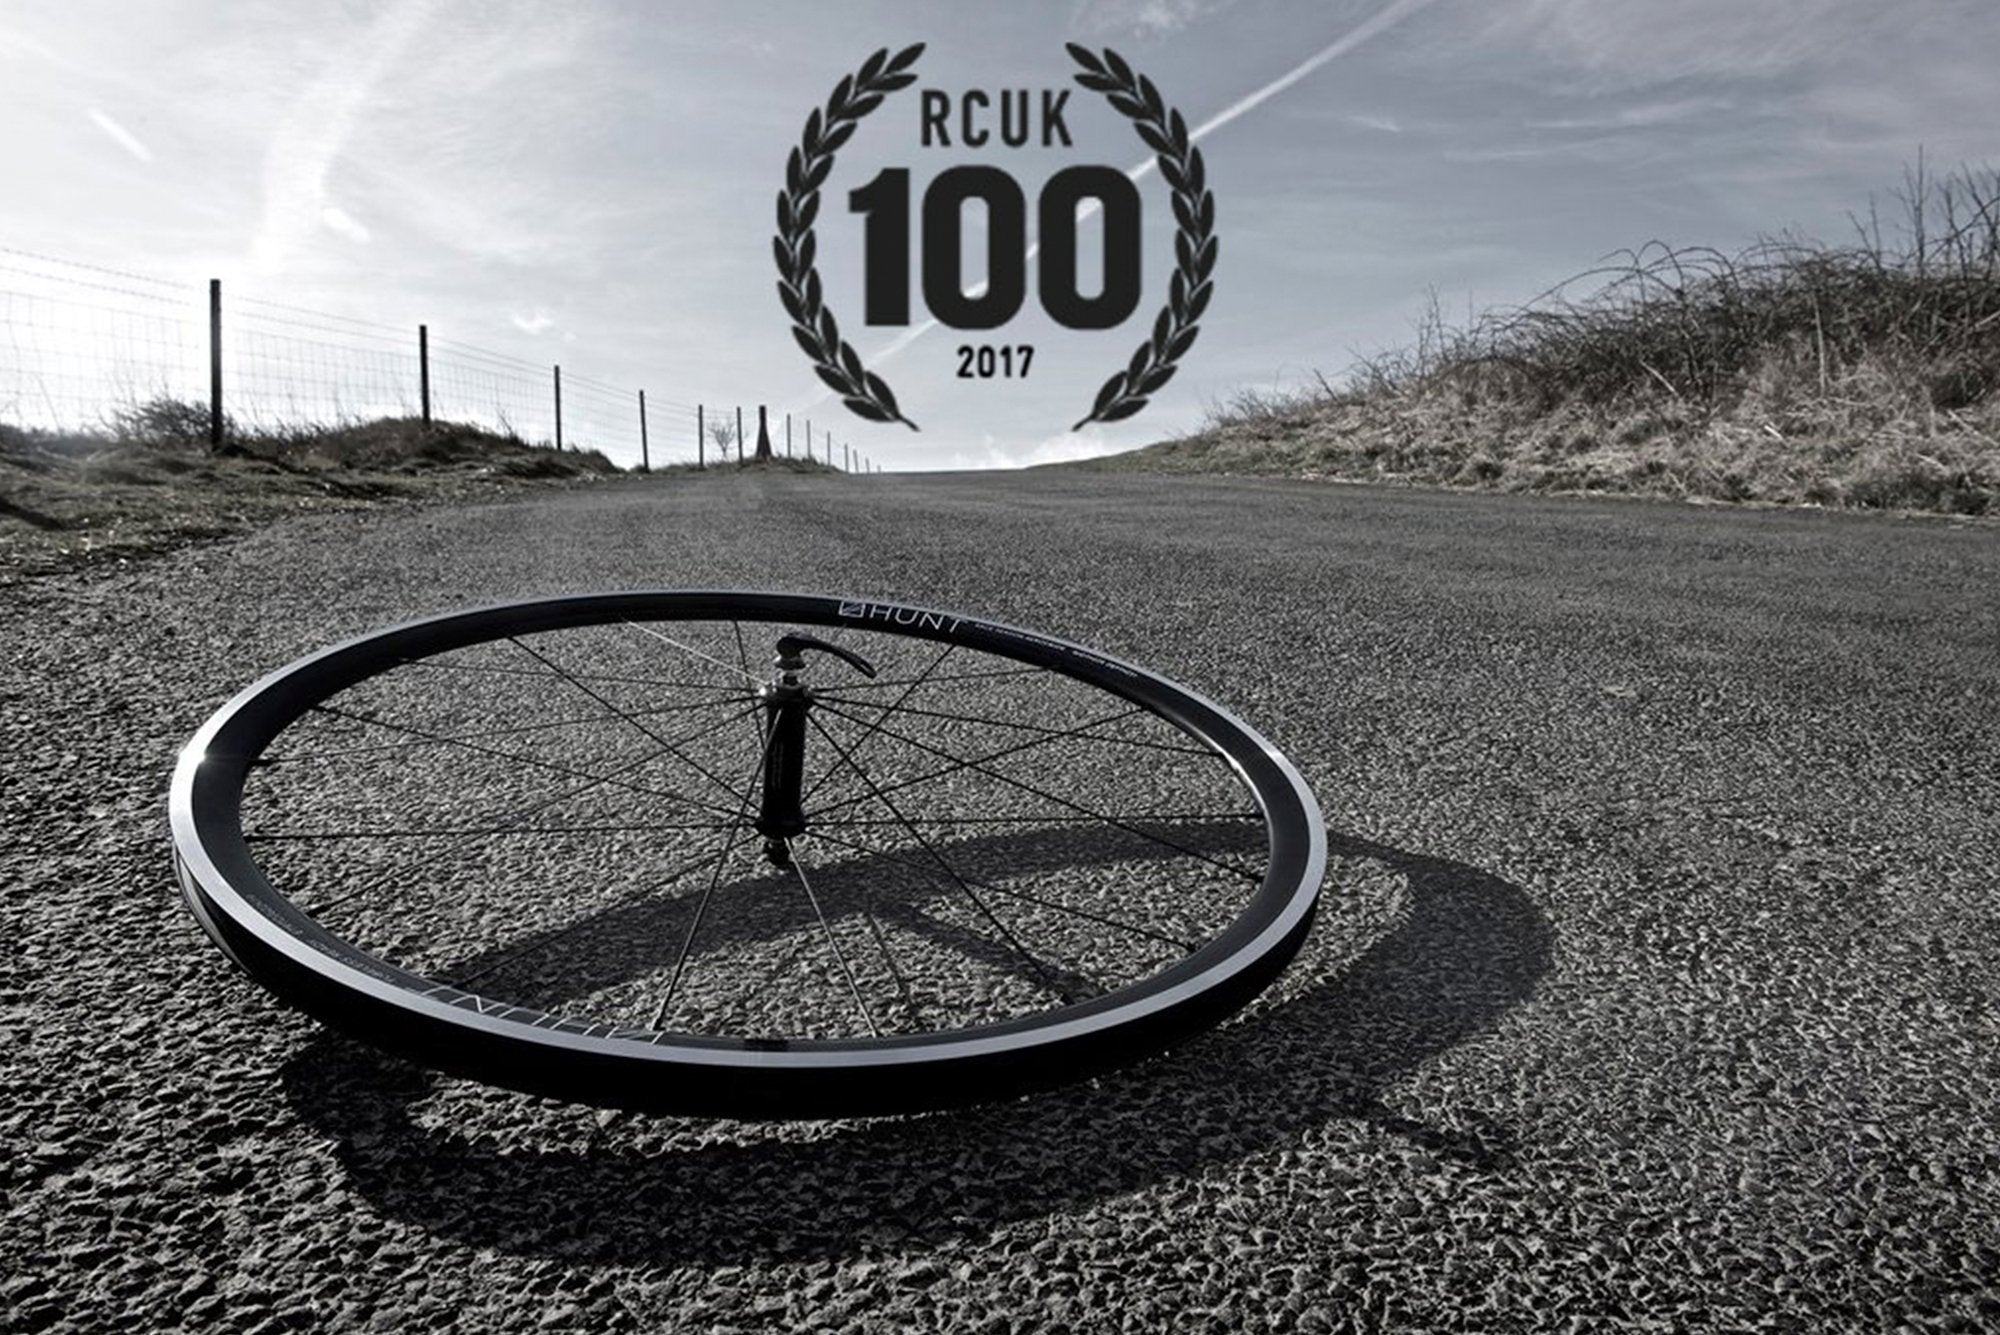 <h1>Rims</h1><i>We've pushed the boundaries and added even more width and depth for extra grip, low aero drag and low rolling resistance. 24mm wide and 31mm deep rounded profile rim made from an enriched alloy that builds into a sub 1500g wheelset. HFR+ alloy is a material that uses a heat-treatment process which delivers outstanding weight, stiffness and durability meaning rims can be wider and deeper for better aero performance and yet remain super-light for excellent climbing and acceleration.</i>